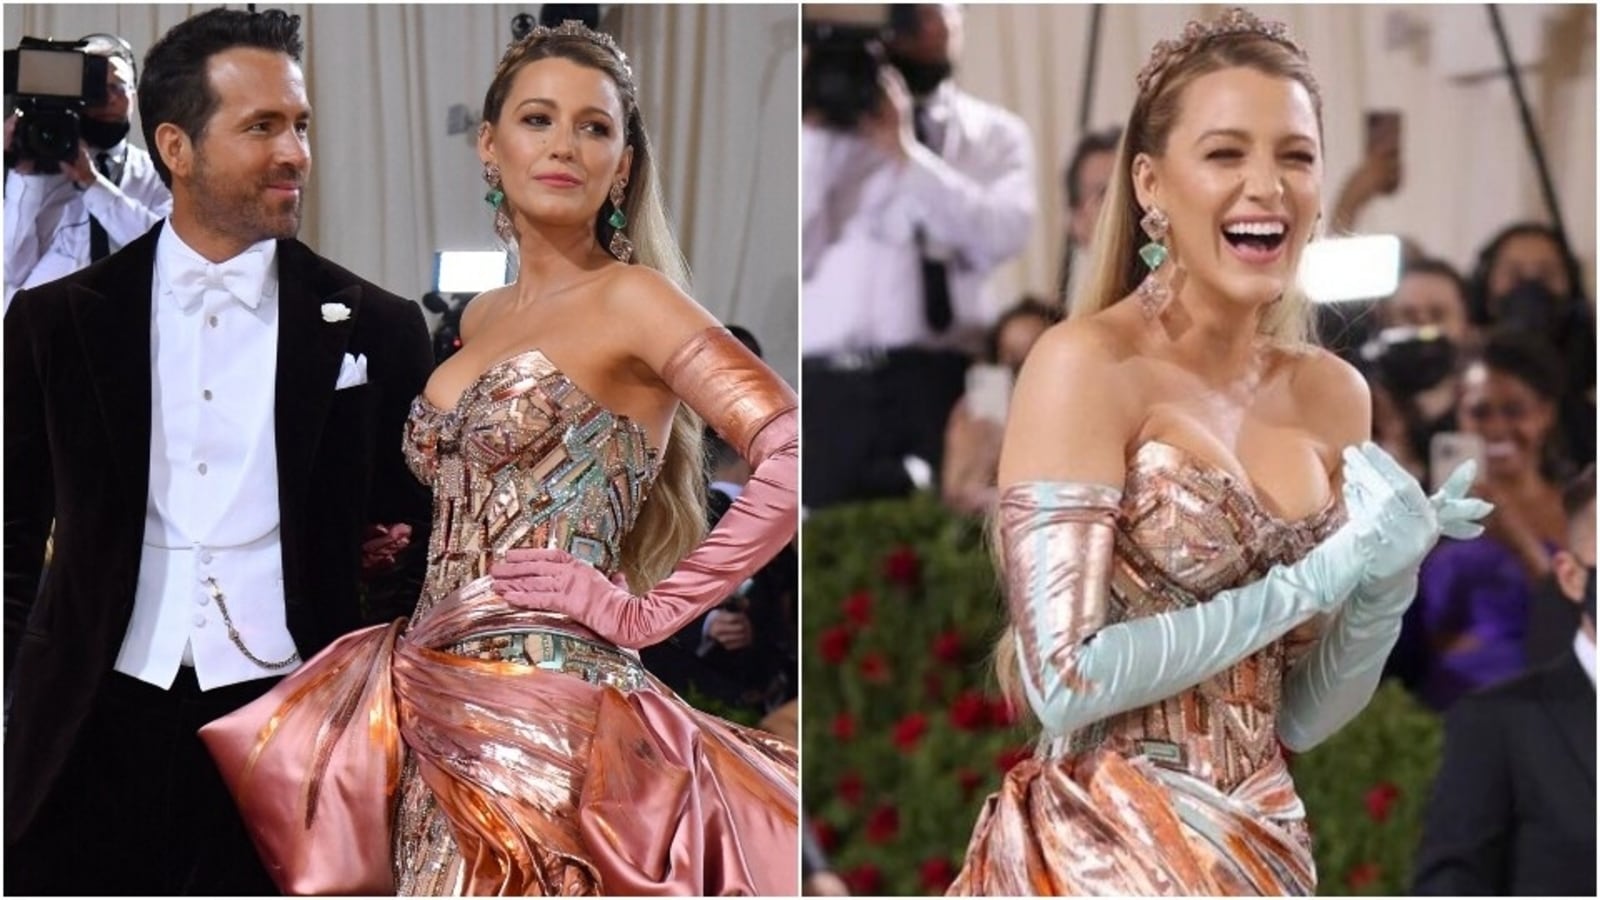 Blake Lively makes heads turn at the Met Gala 2022 and has a Lady Gaga  costume reveal moment